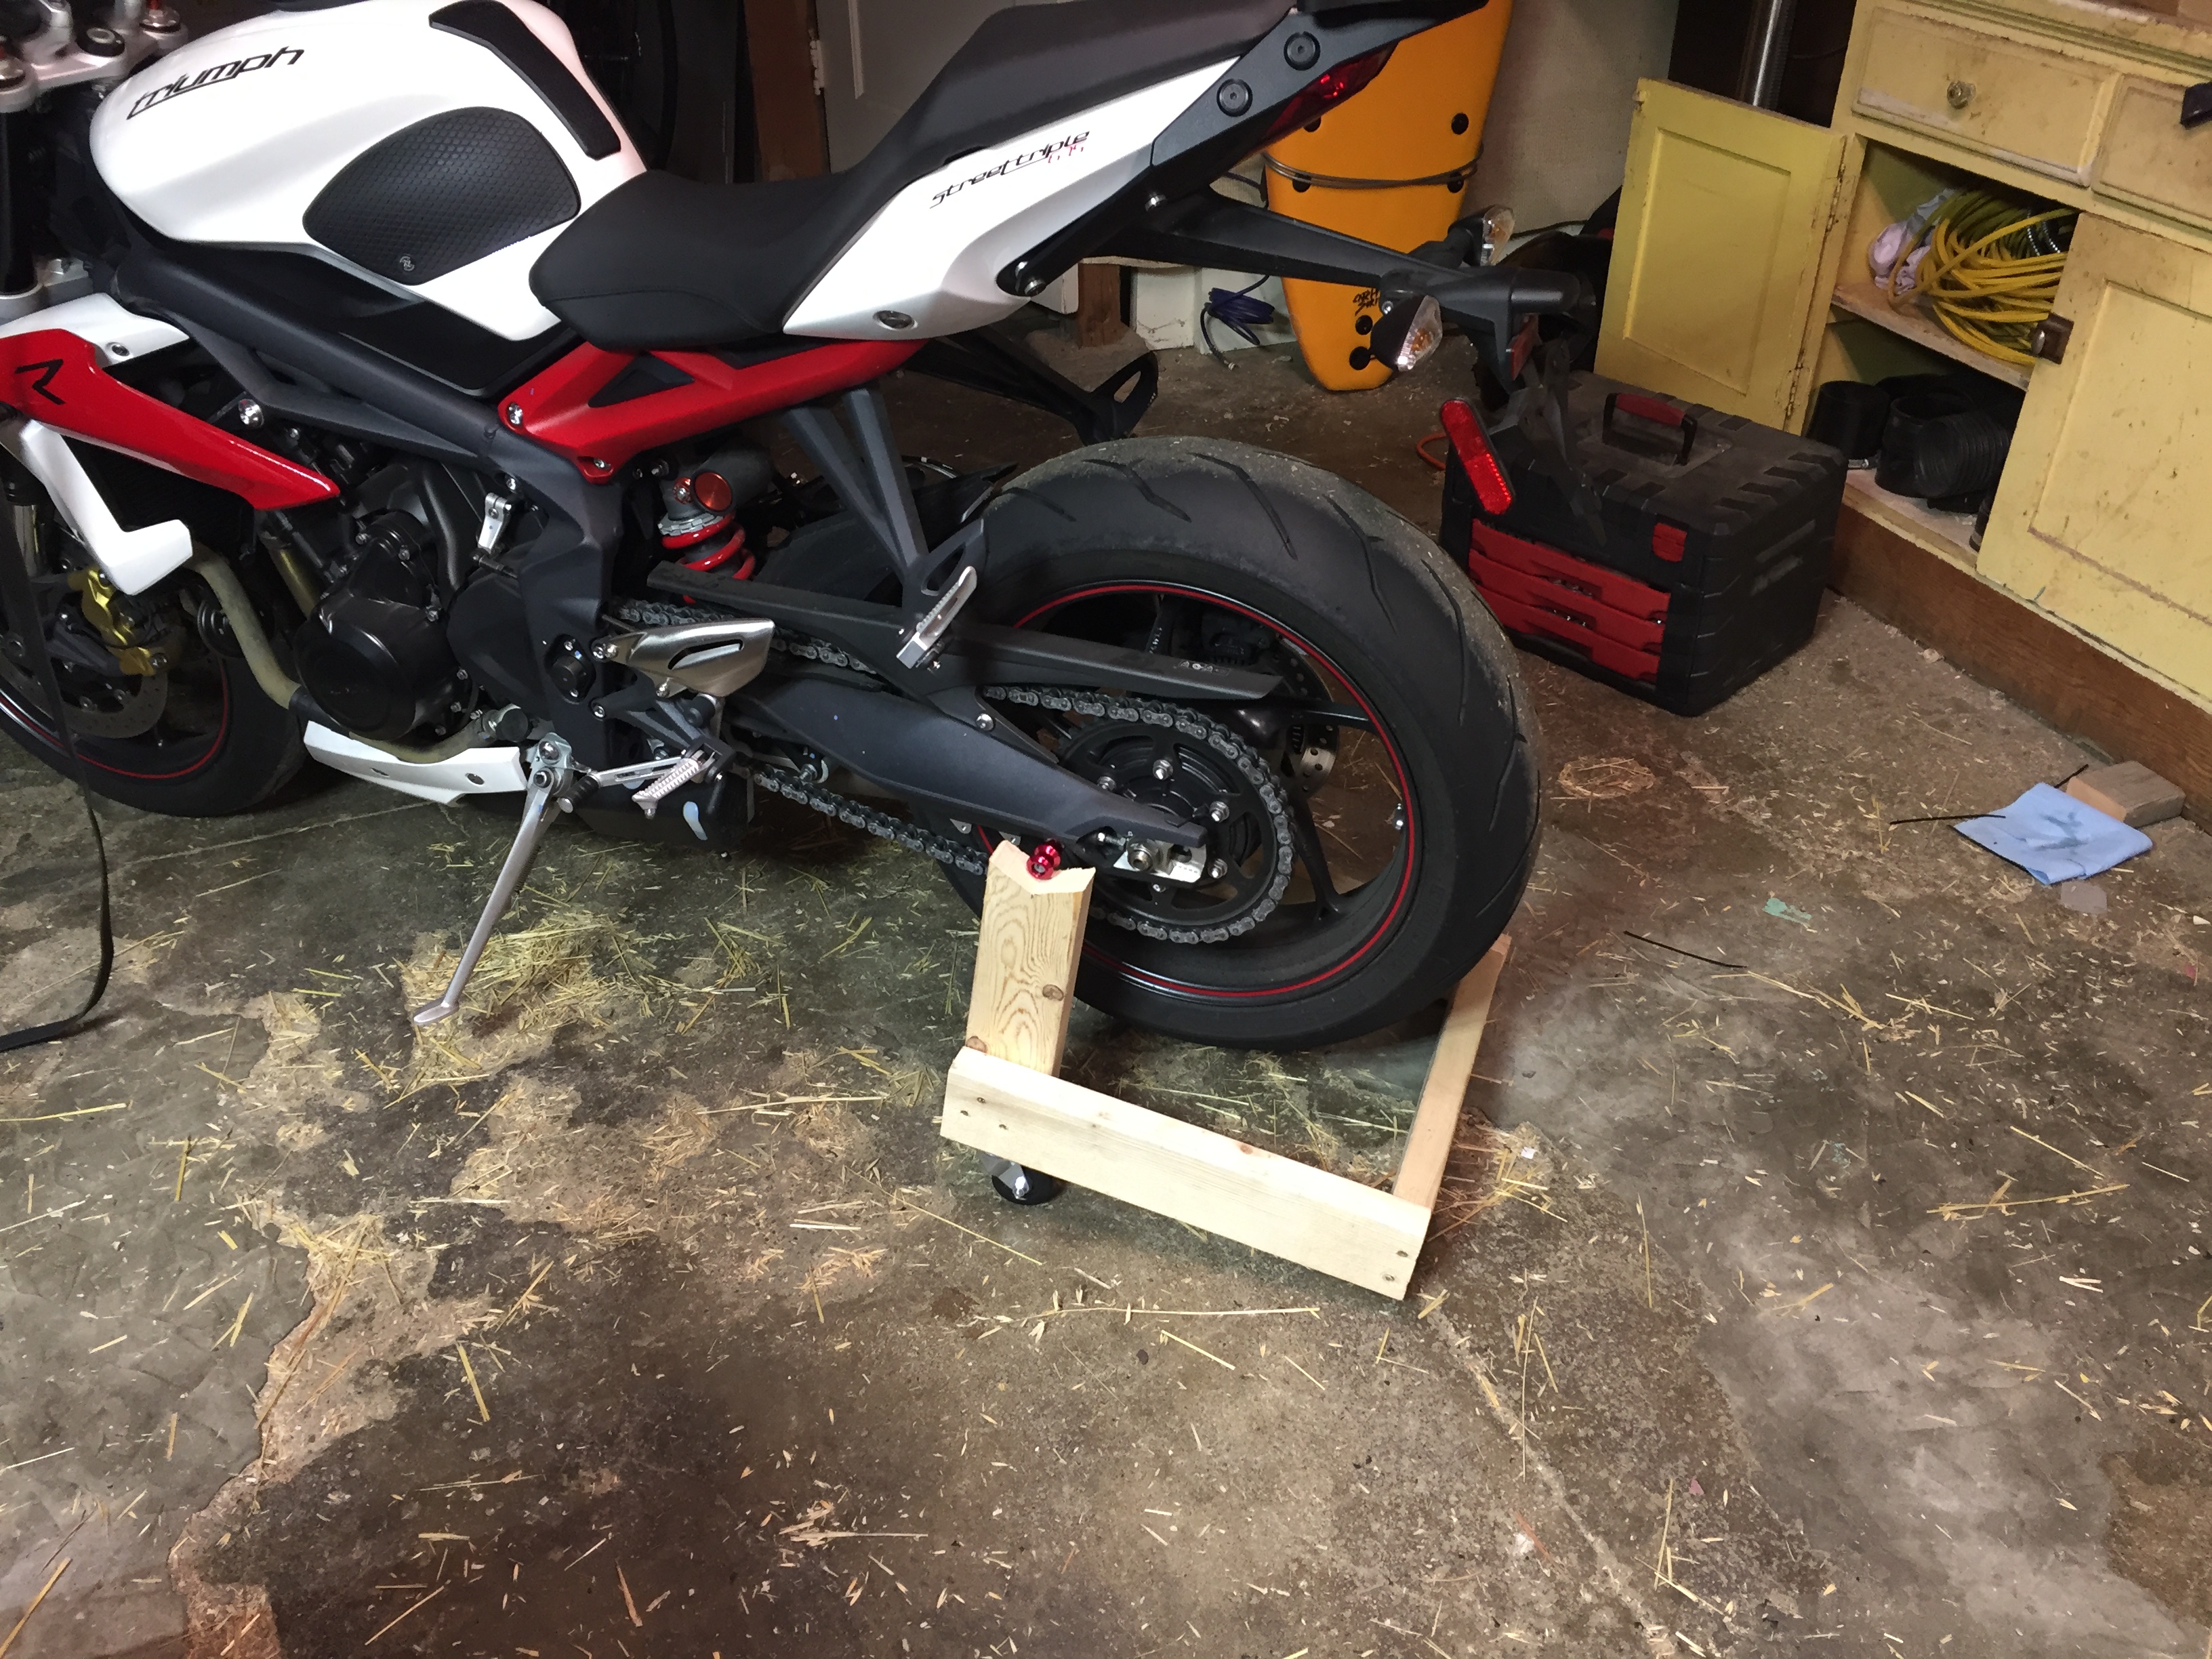 Homemade wooden rear stand - Triumph Forum: Triumph Rat Motorcycle ...